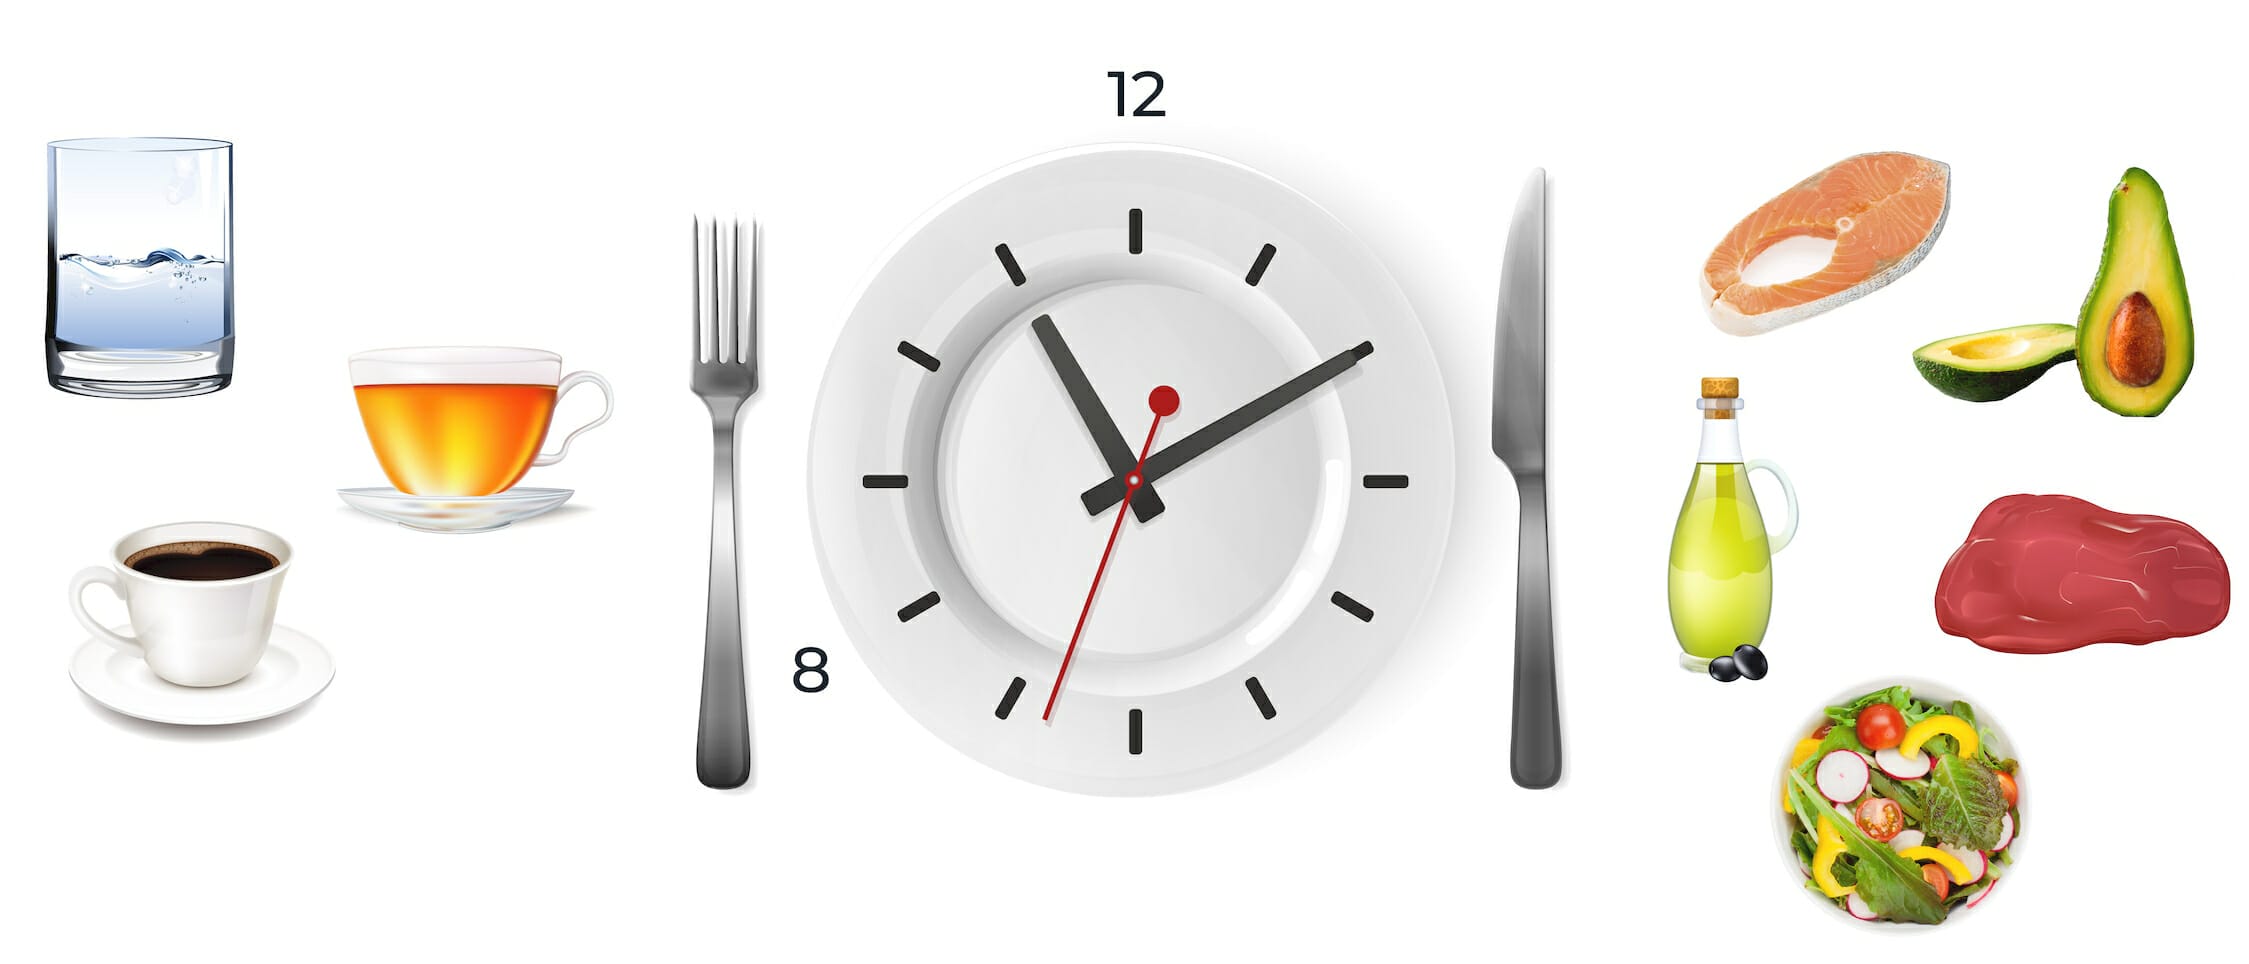 Intermittent Fasting Health Benefits and Tips